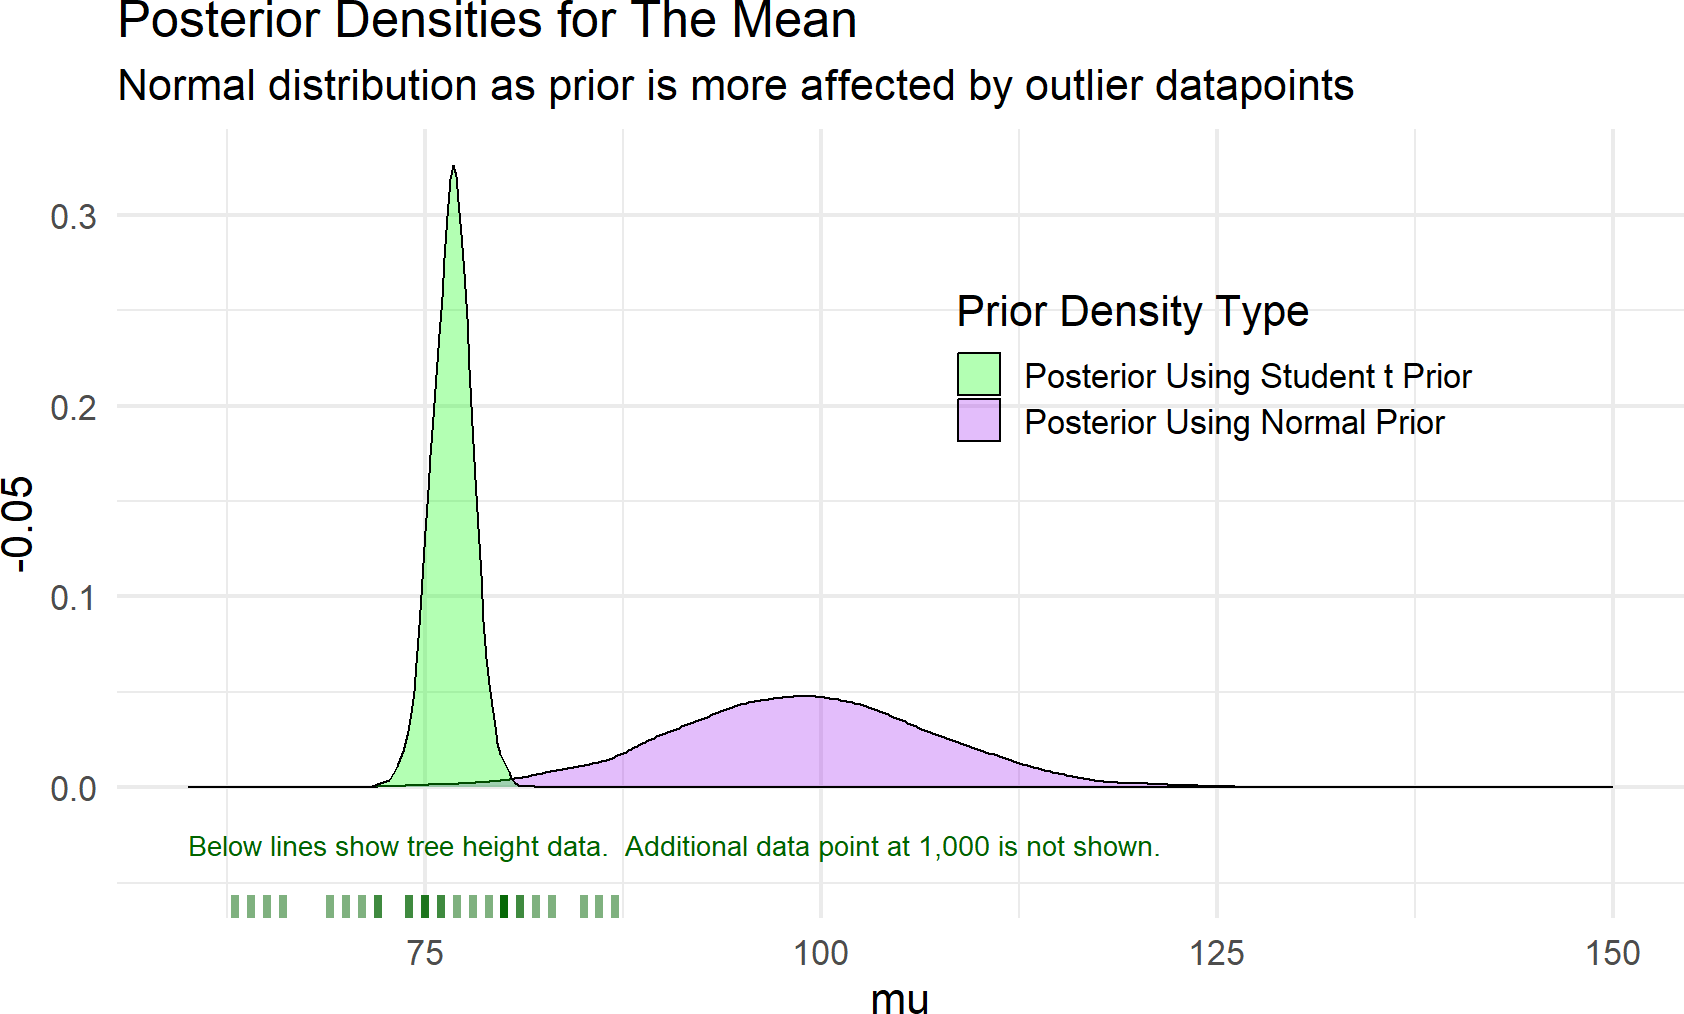 Estimates of a distributions central tendency can be made to downplay outliers by using a student t prior distribution for the mean.